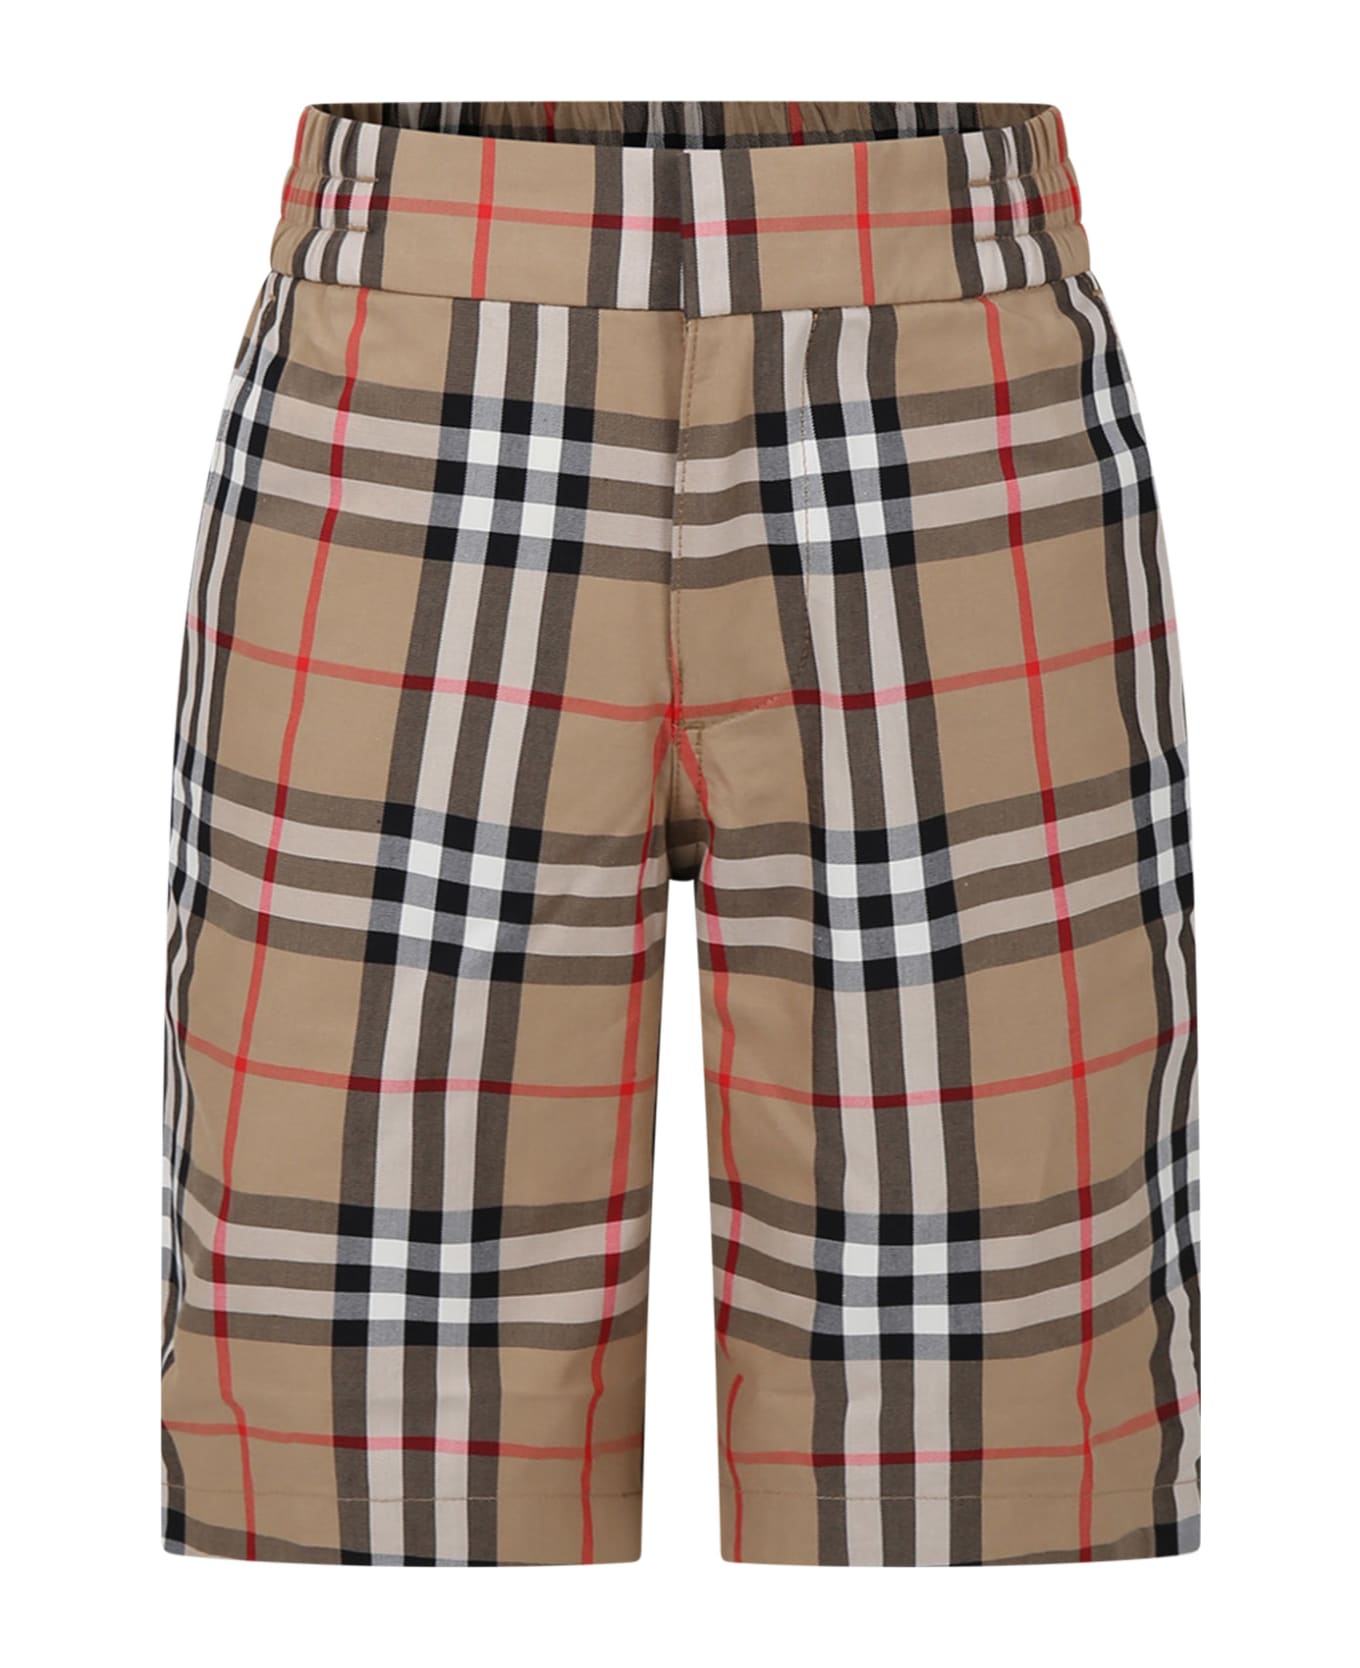 Burberry Beige Shorts For Boy With Iconic All-over Vintage Check - Beige ボトムス